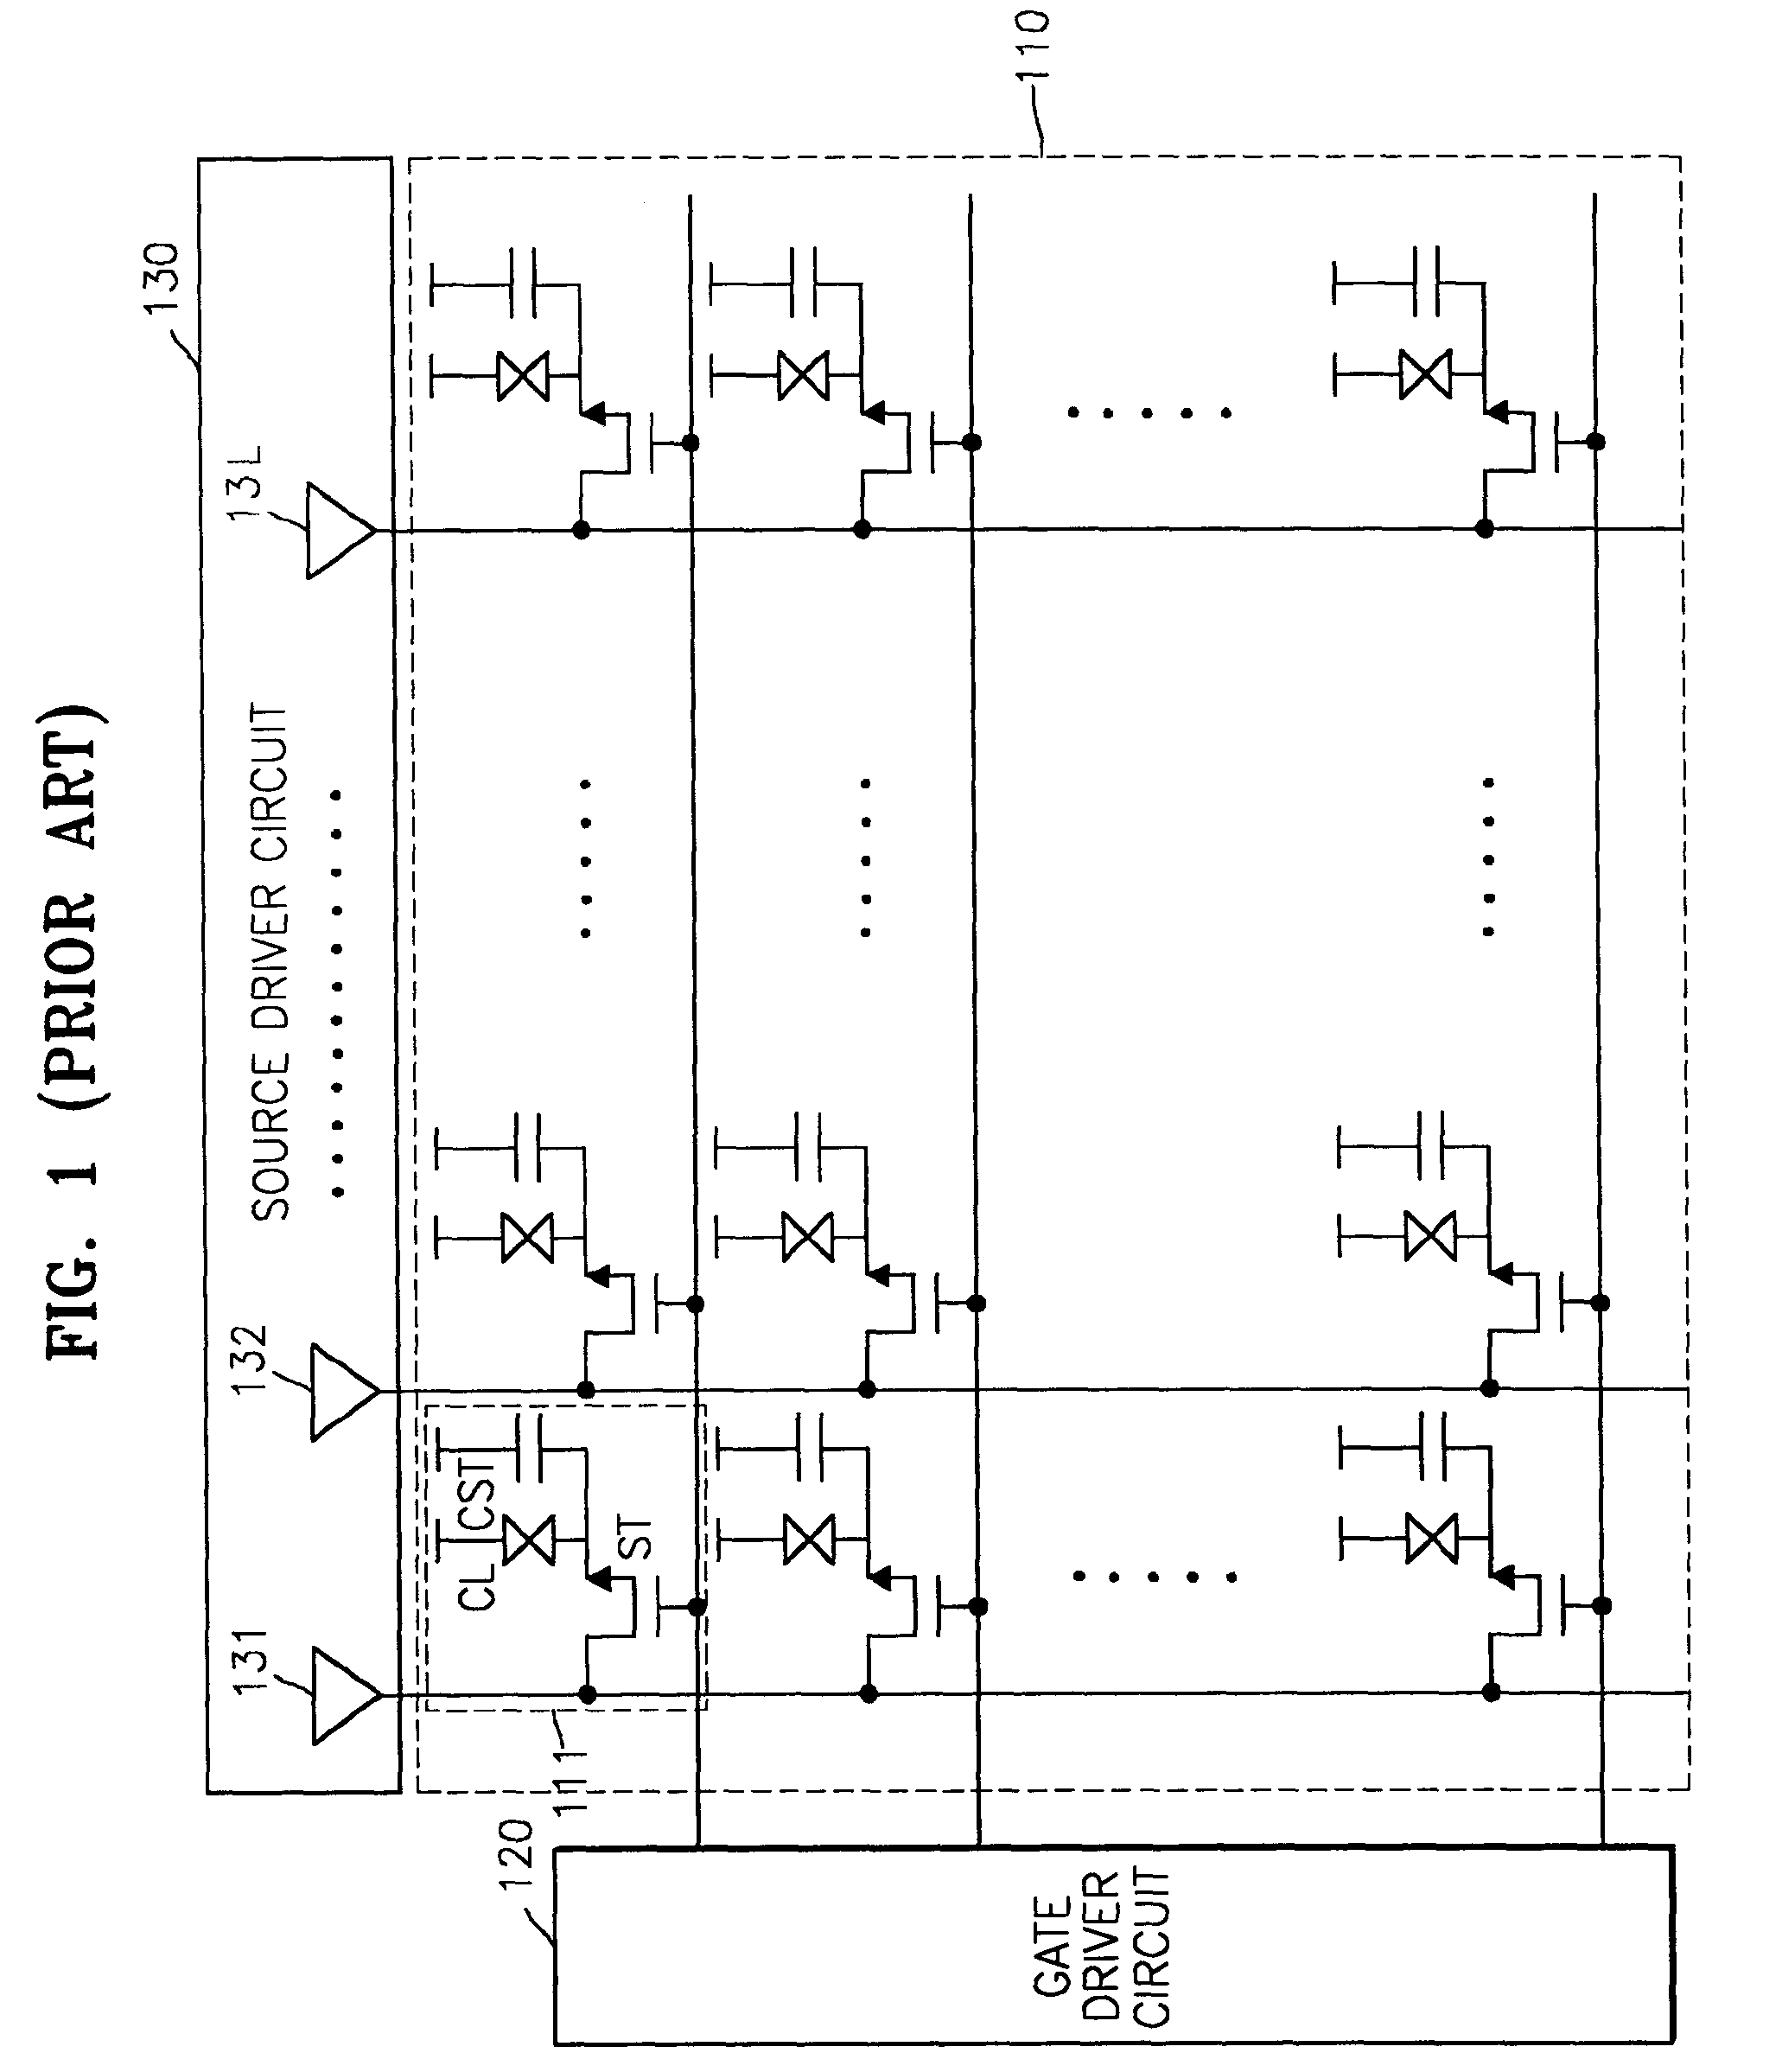 Circuit and method for driving a liquid crystal display device using low power